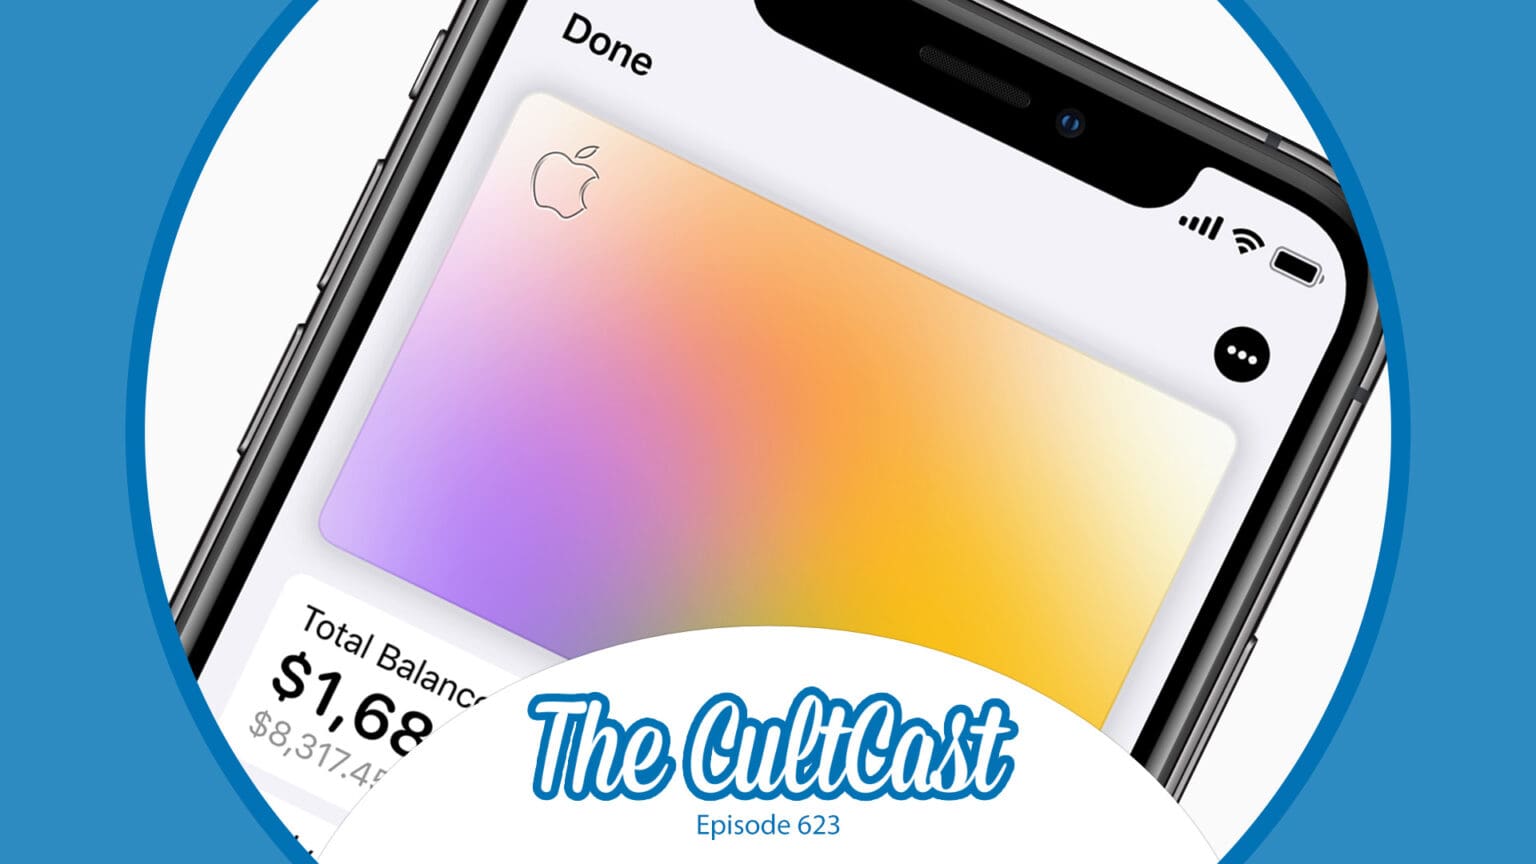 Apple Card on an iPhone. CultCast episode 623.